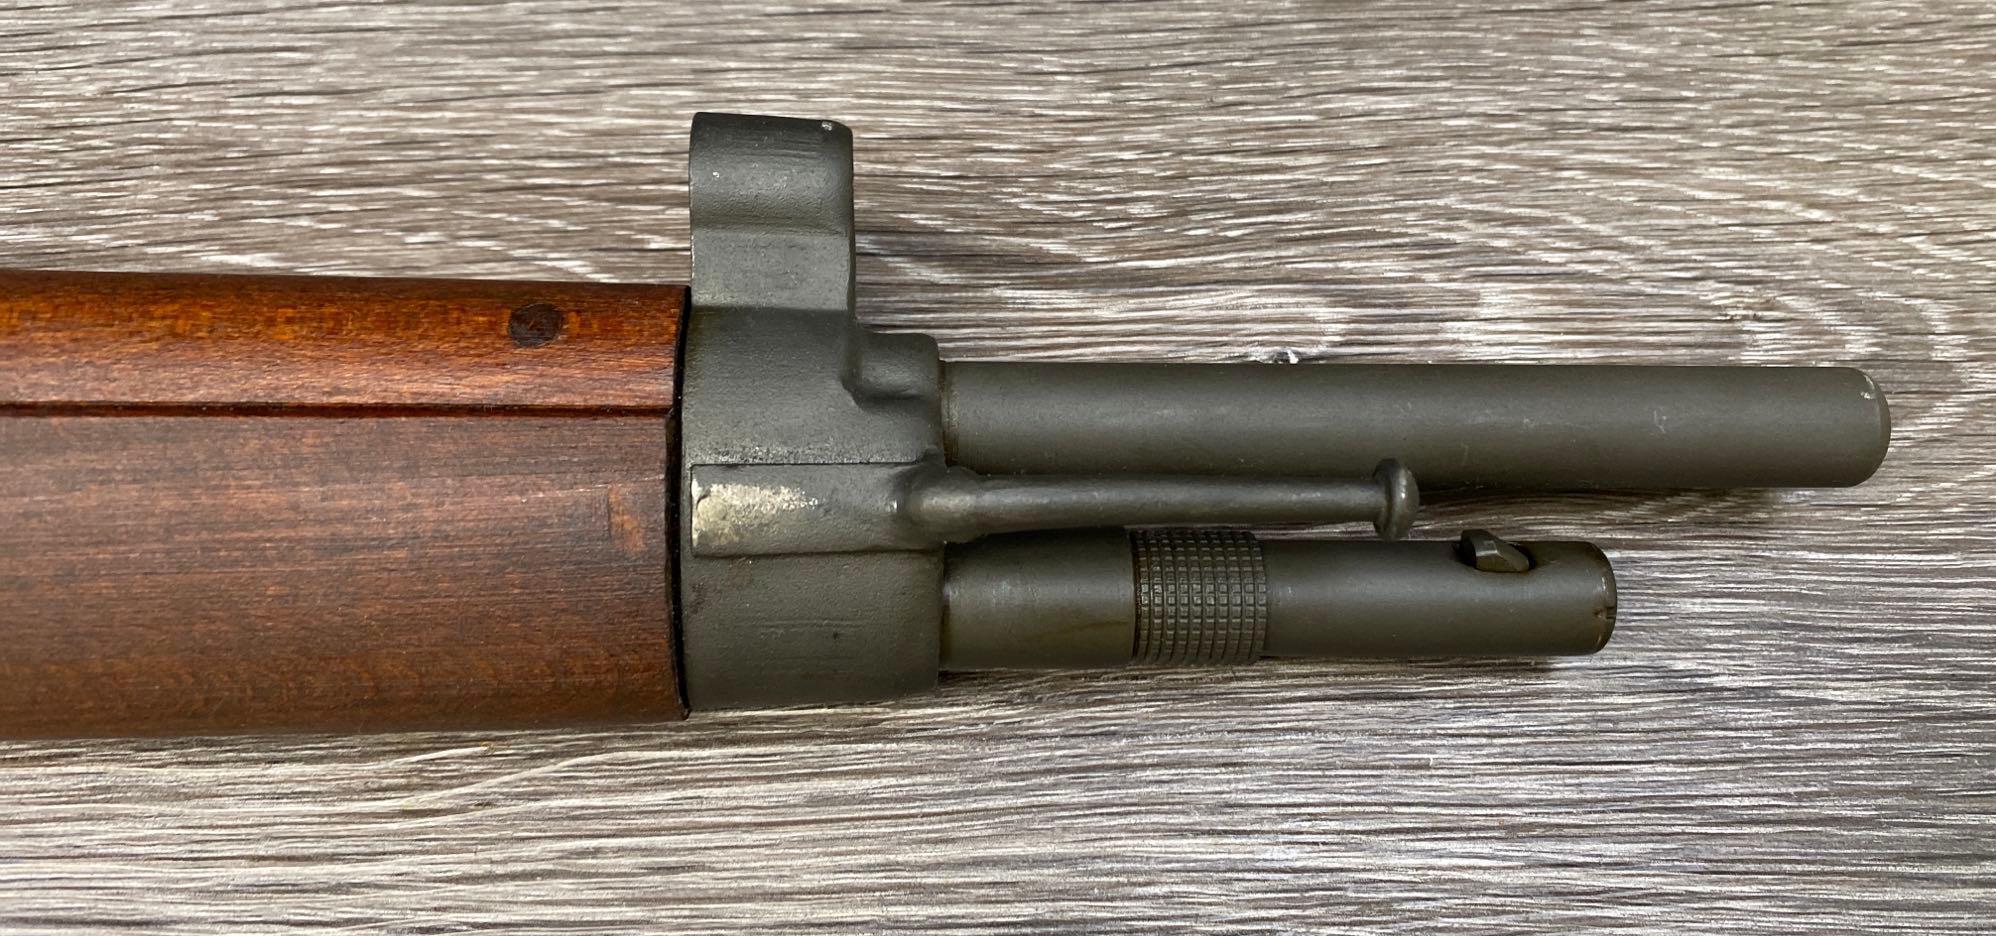 FRENCH MAS MODELE 1936 BOLT-ACTION RIFLE 7.5x54mm FRENCH CAL.